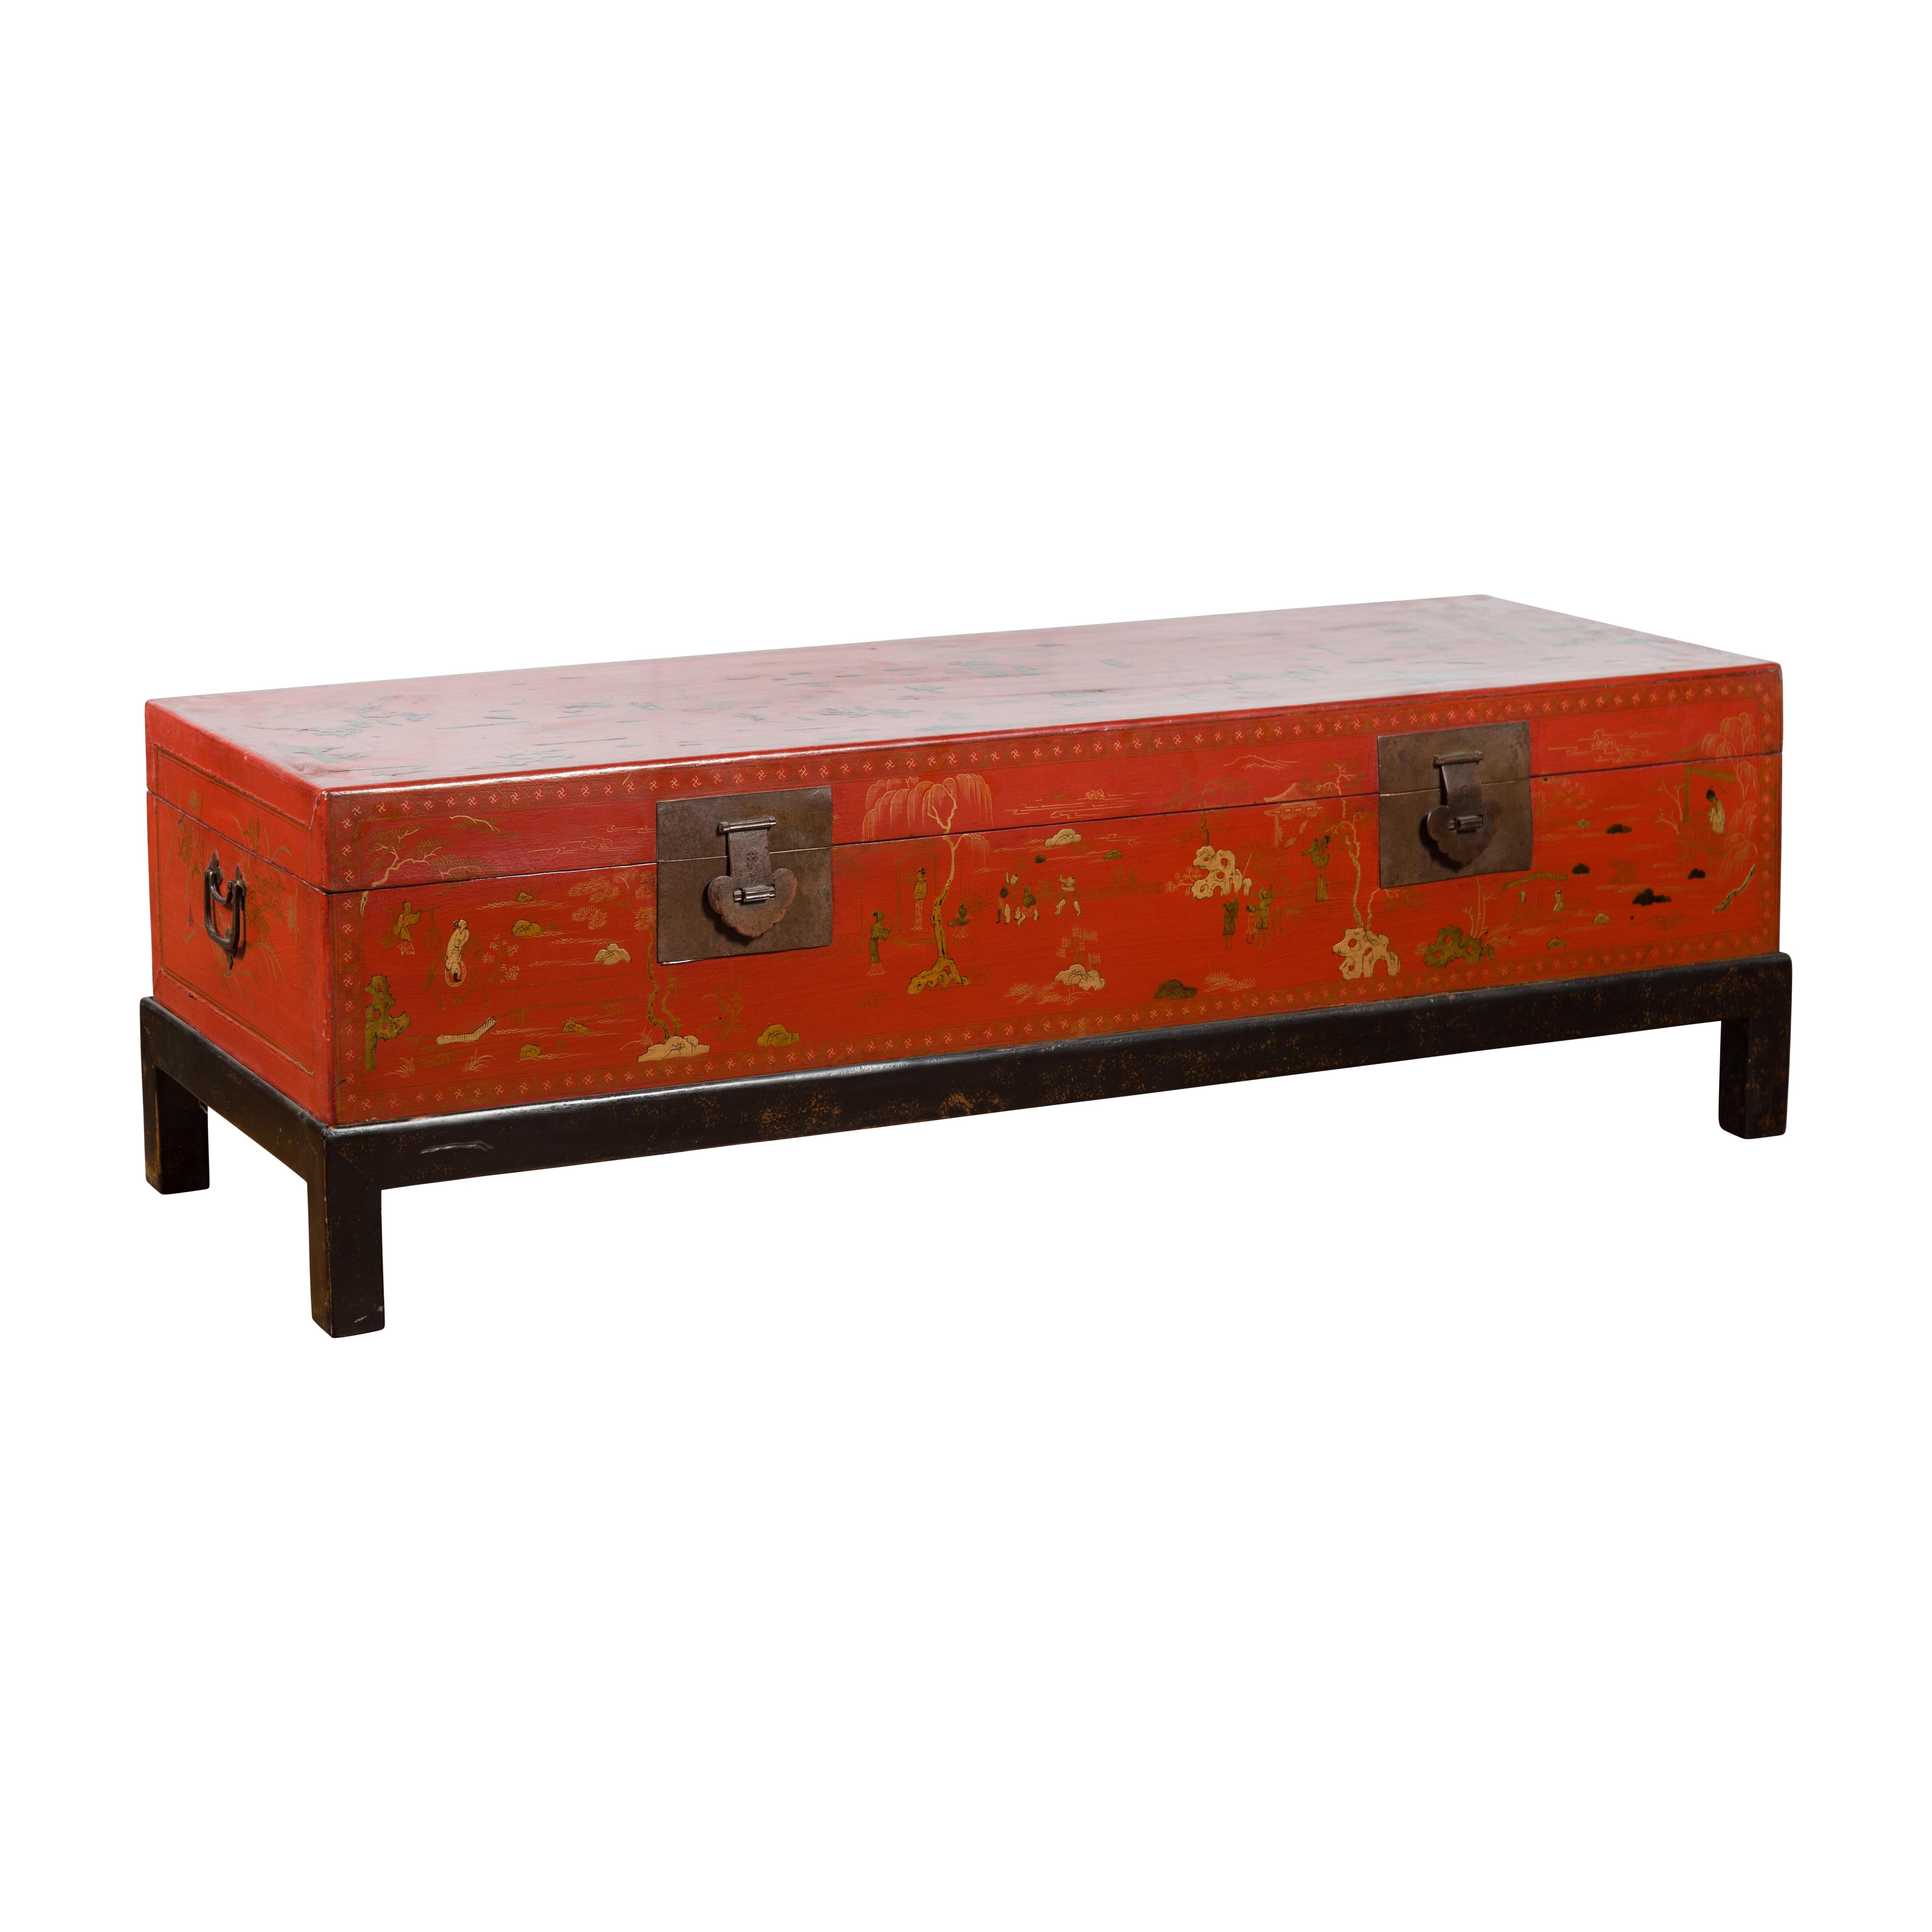 A vintage Chinese red lacquered trunk from the mid-20th century, with gilt Chinoiserie décor and black base. Created in China during the midcentury period, this red lacquered trunk features a rectangular lid adorned with elegant characters in